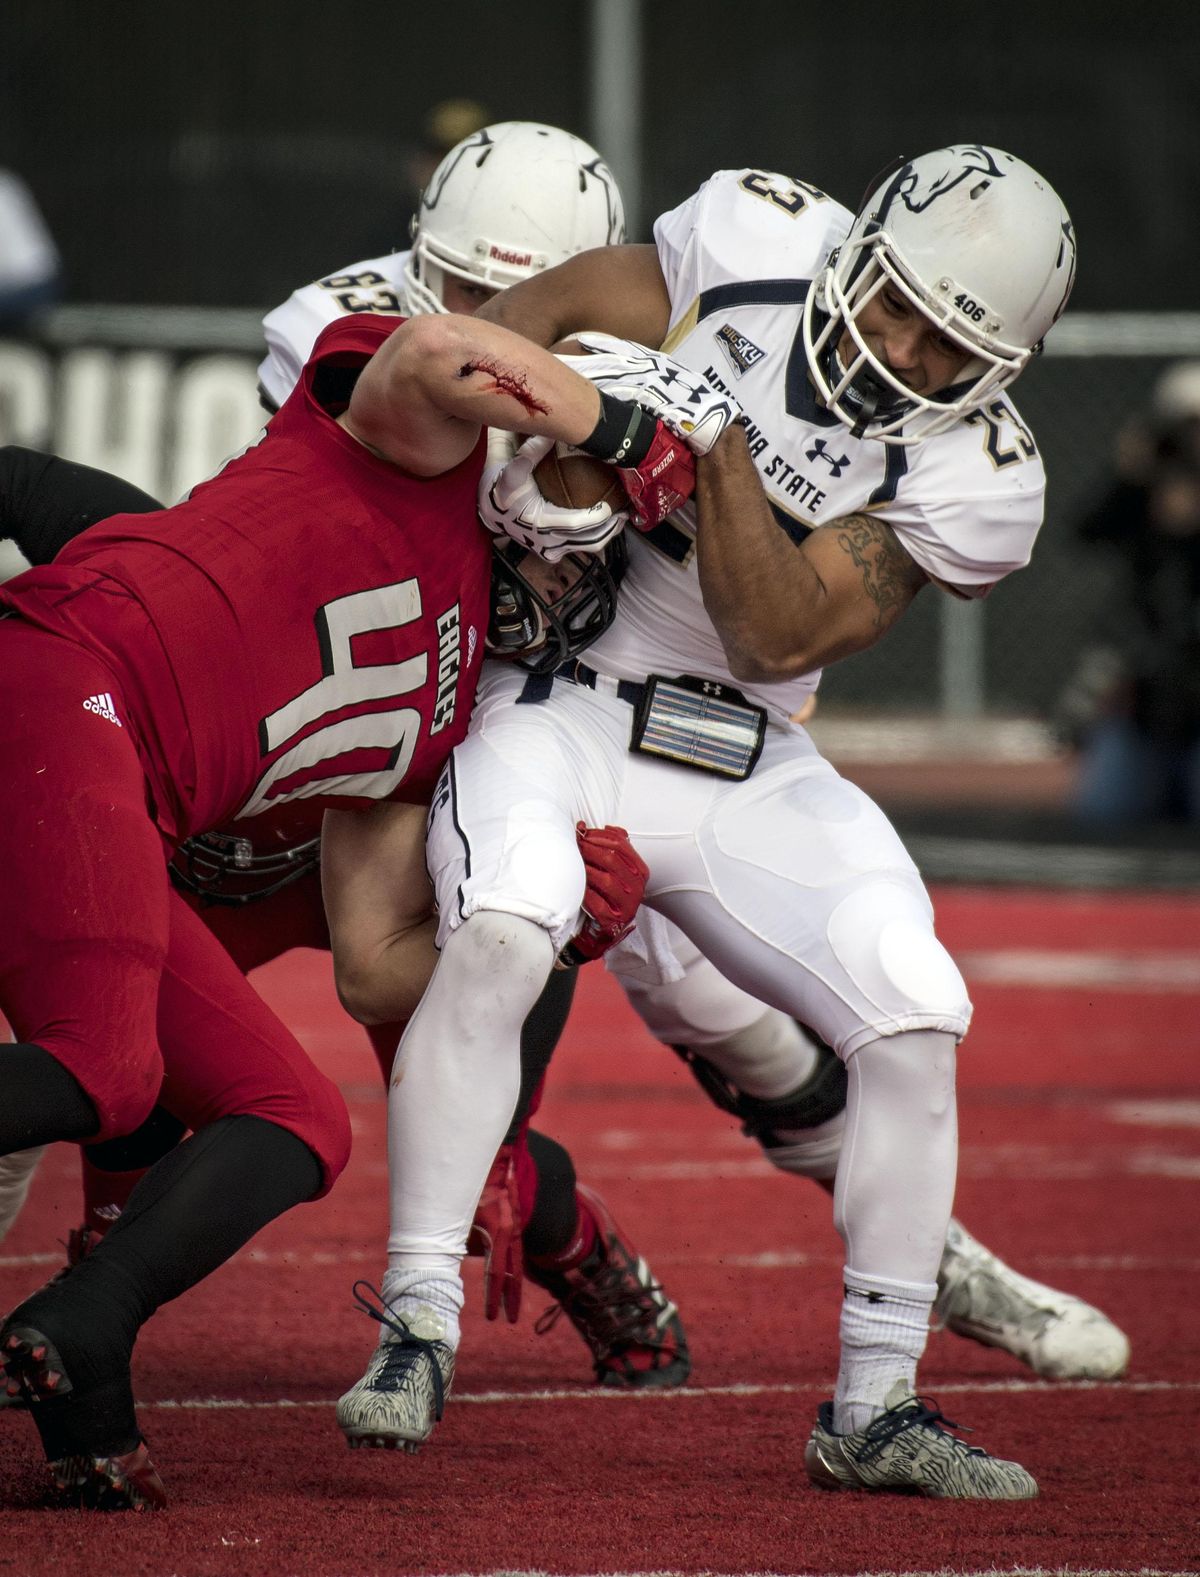 Eastern Washington linebacker Ketner Kupp  tries to strip the ball from Montana State running back Nick LaSane  during the first half  Oct. 14, 2017, in Cheney. (Colin Mulvany / The Spokesman-Review)